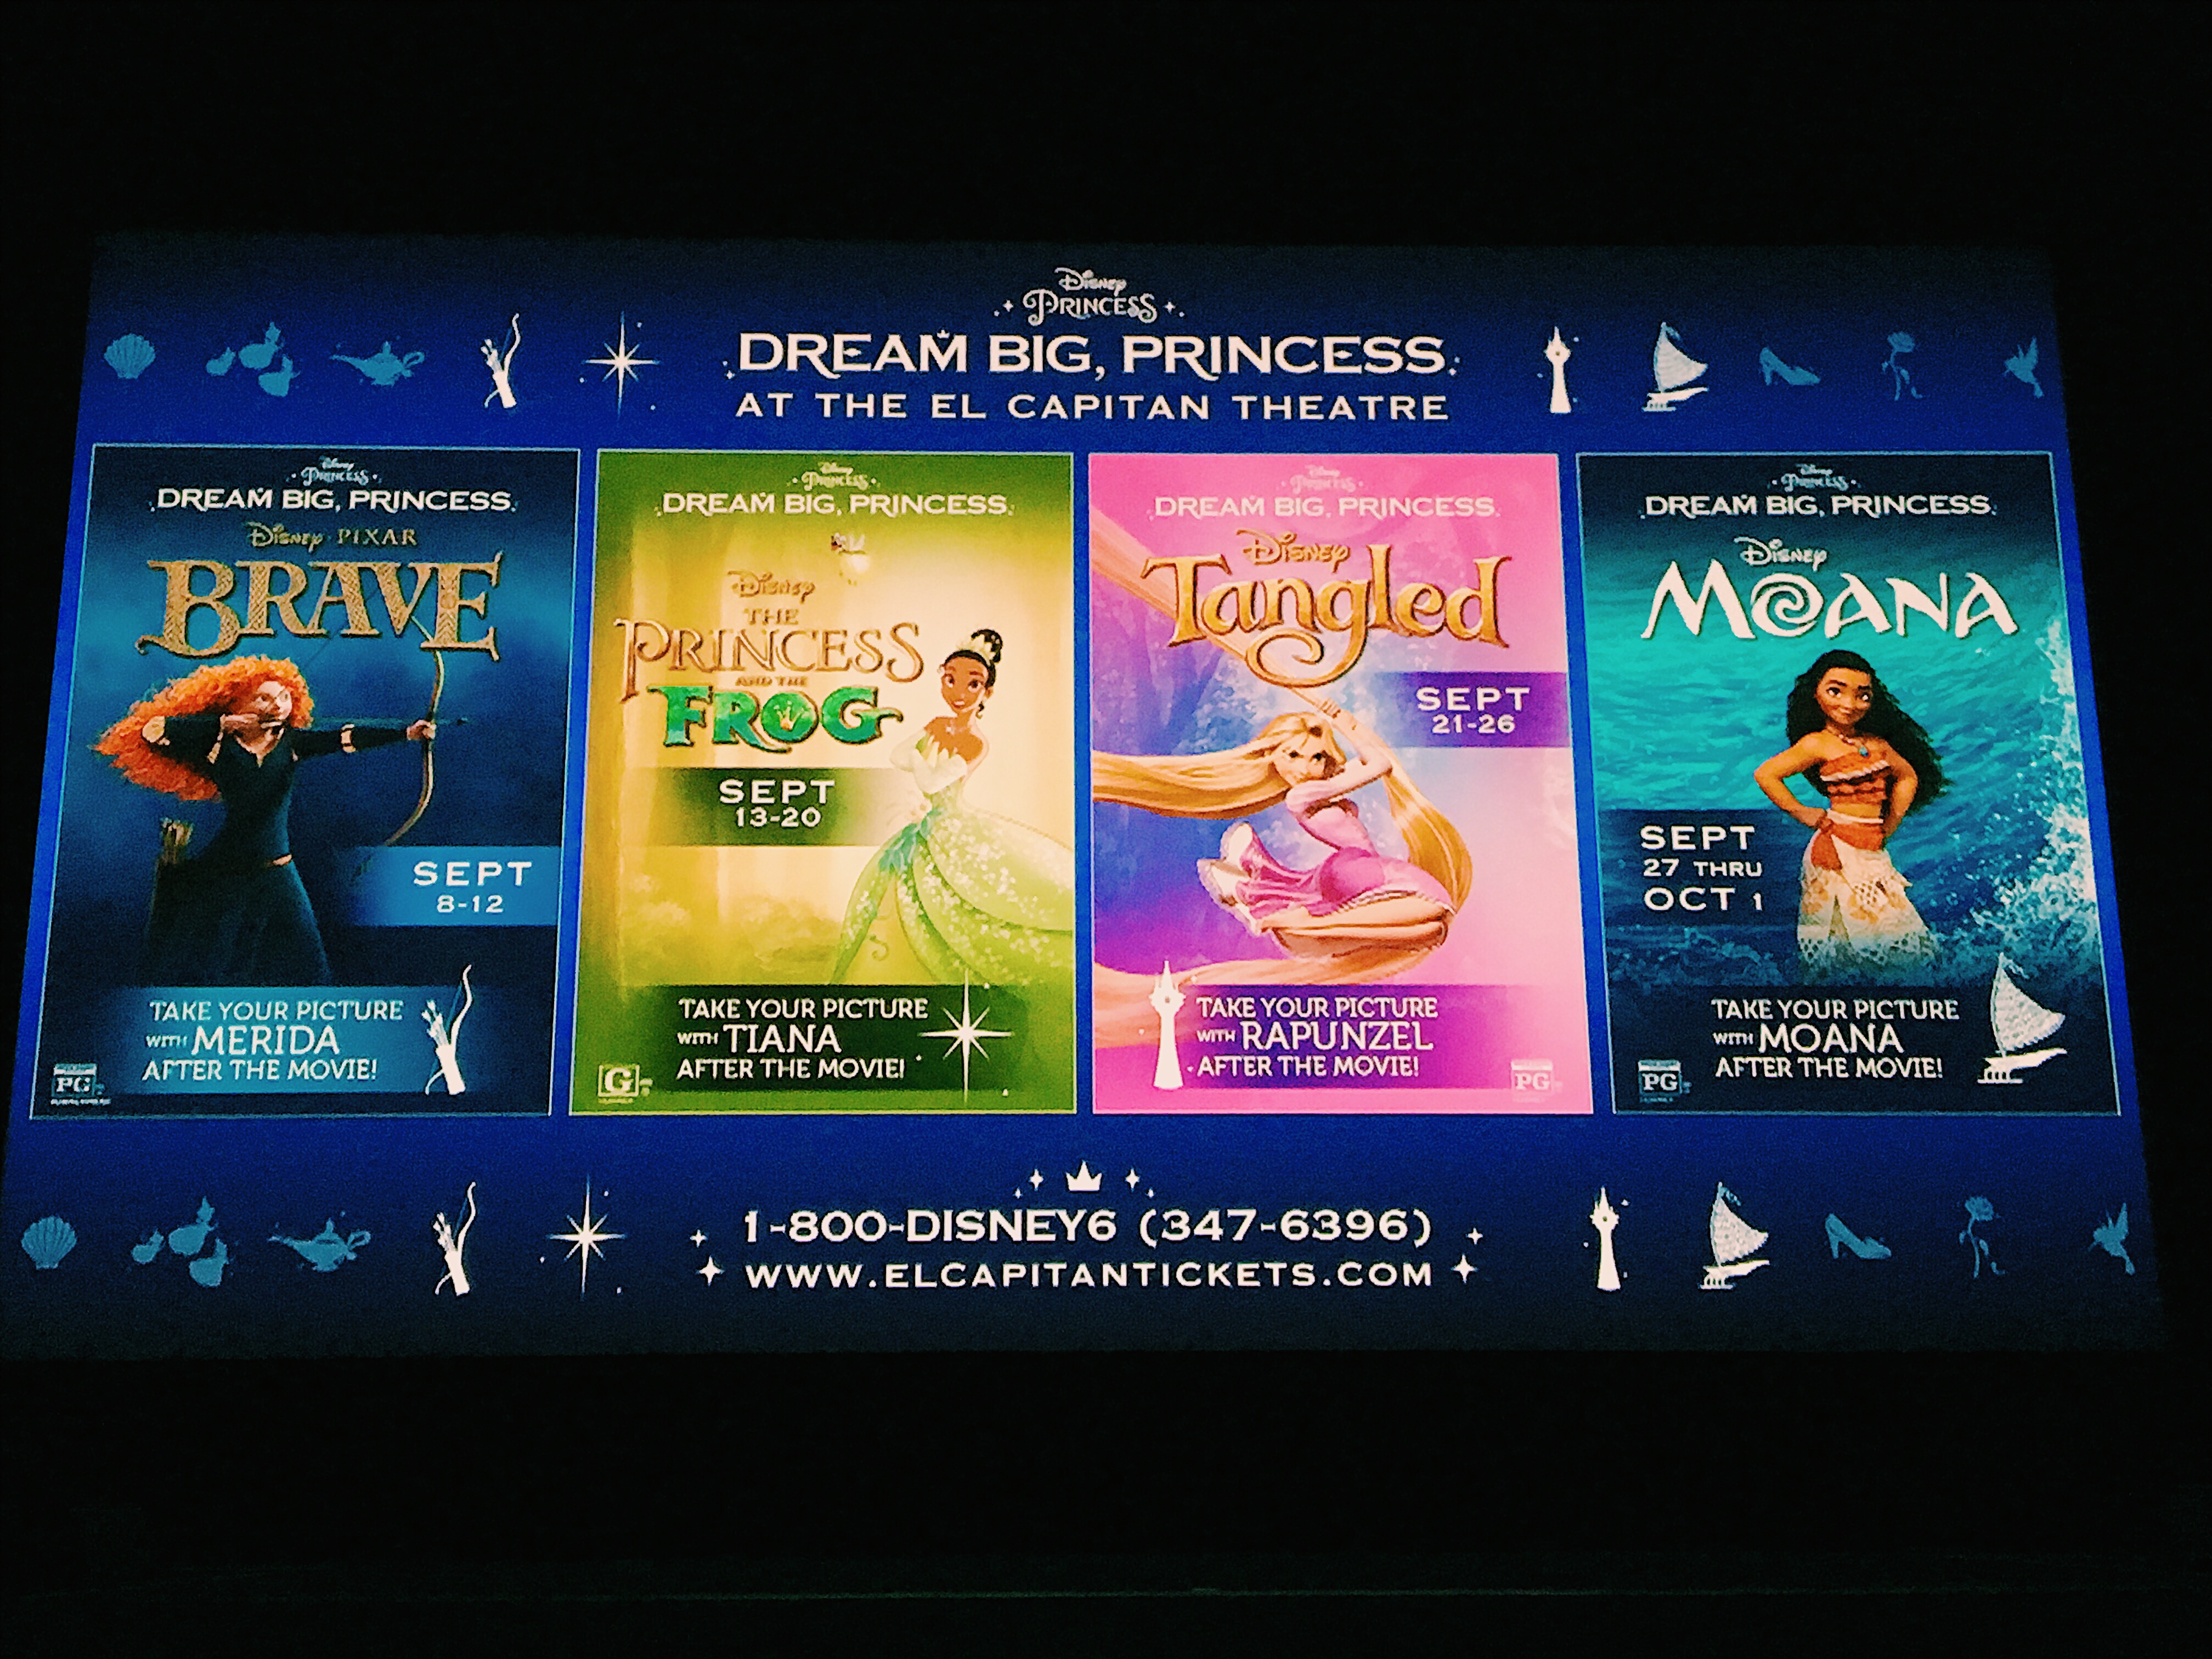 A look at the "Dream Big Princess" event in the works at the El Capitan. 